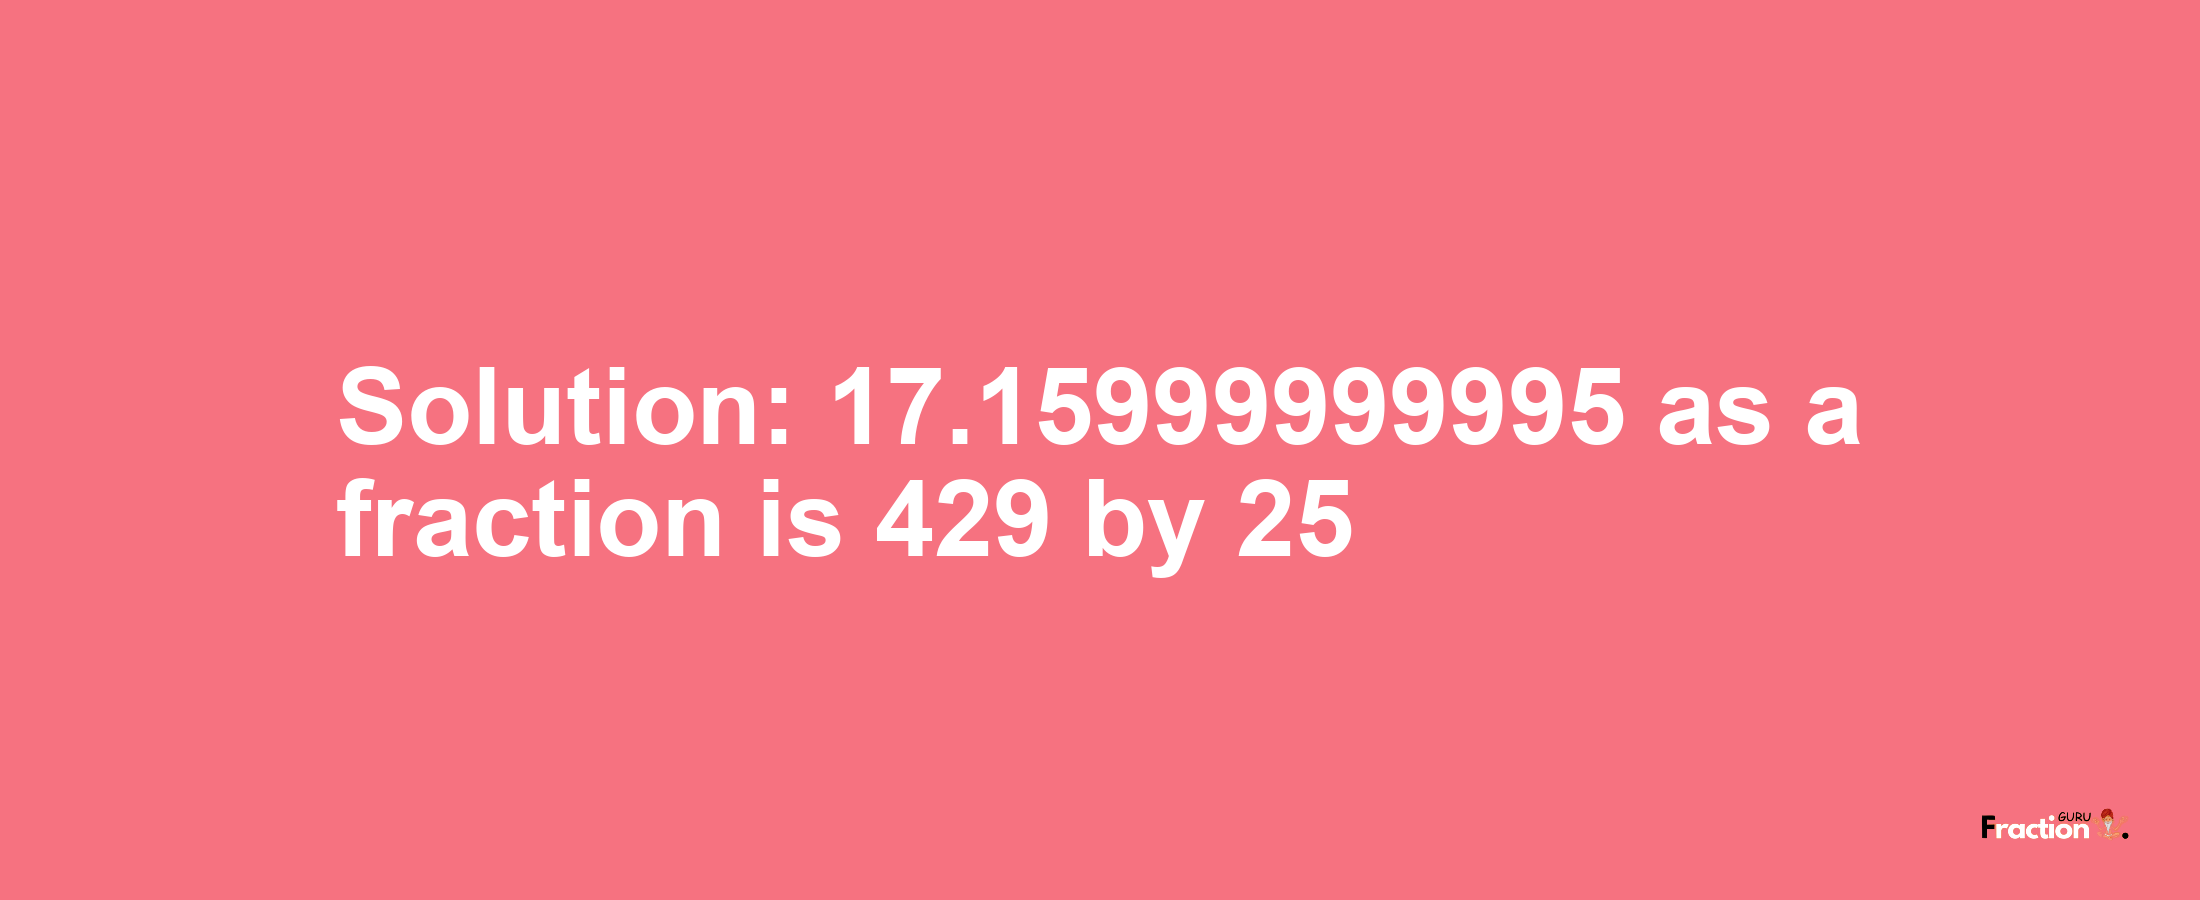 Solution:17.15999999995 as a fraction is 429/25